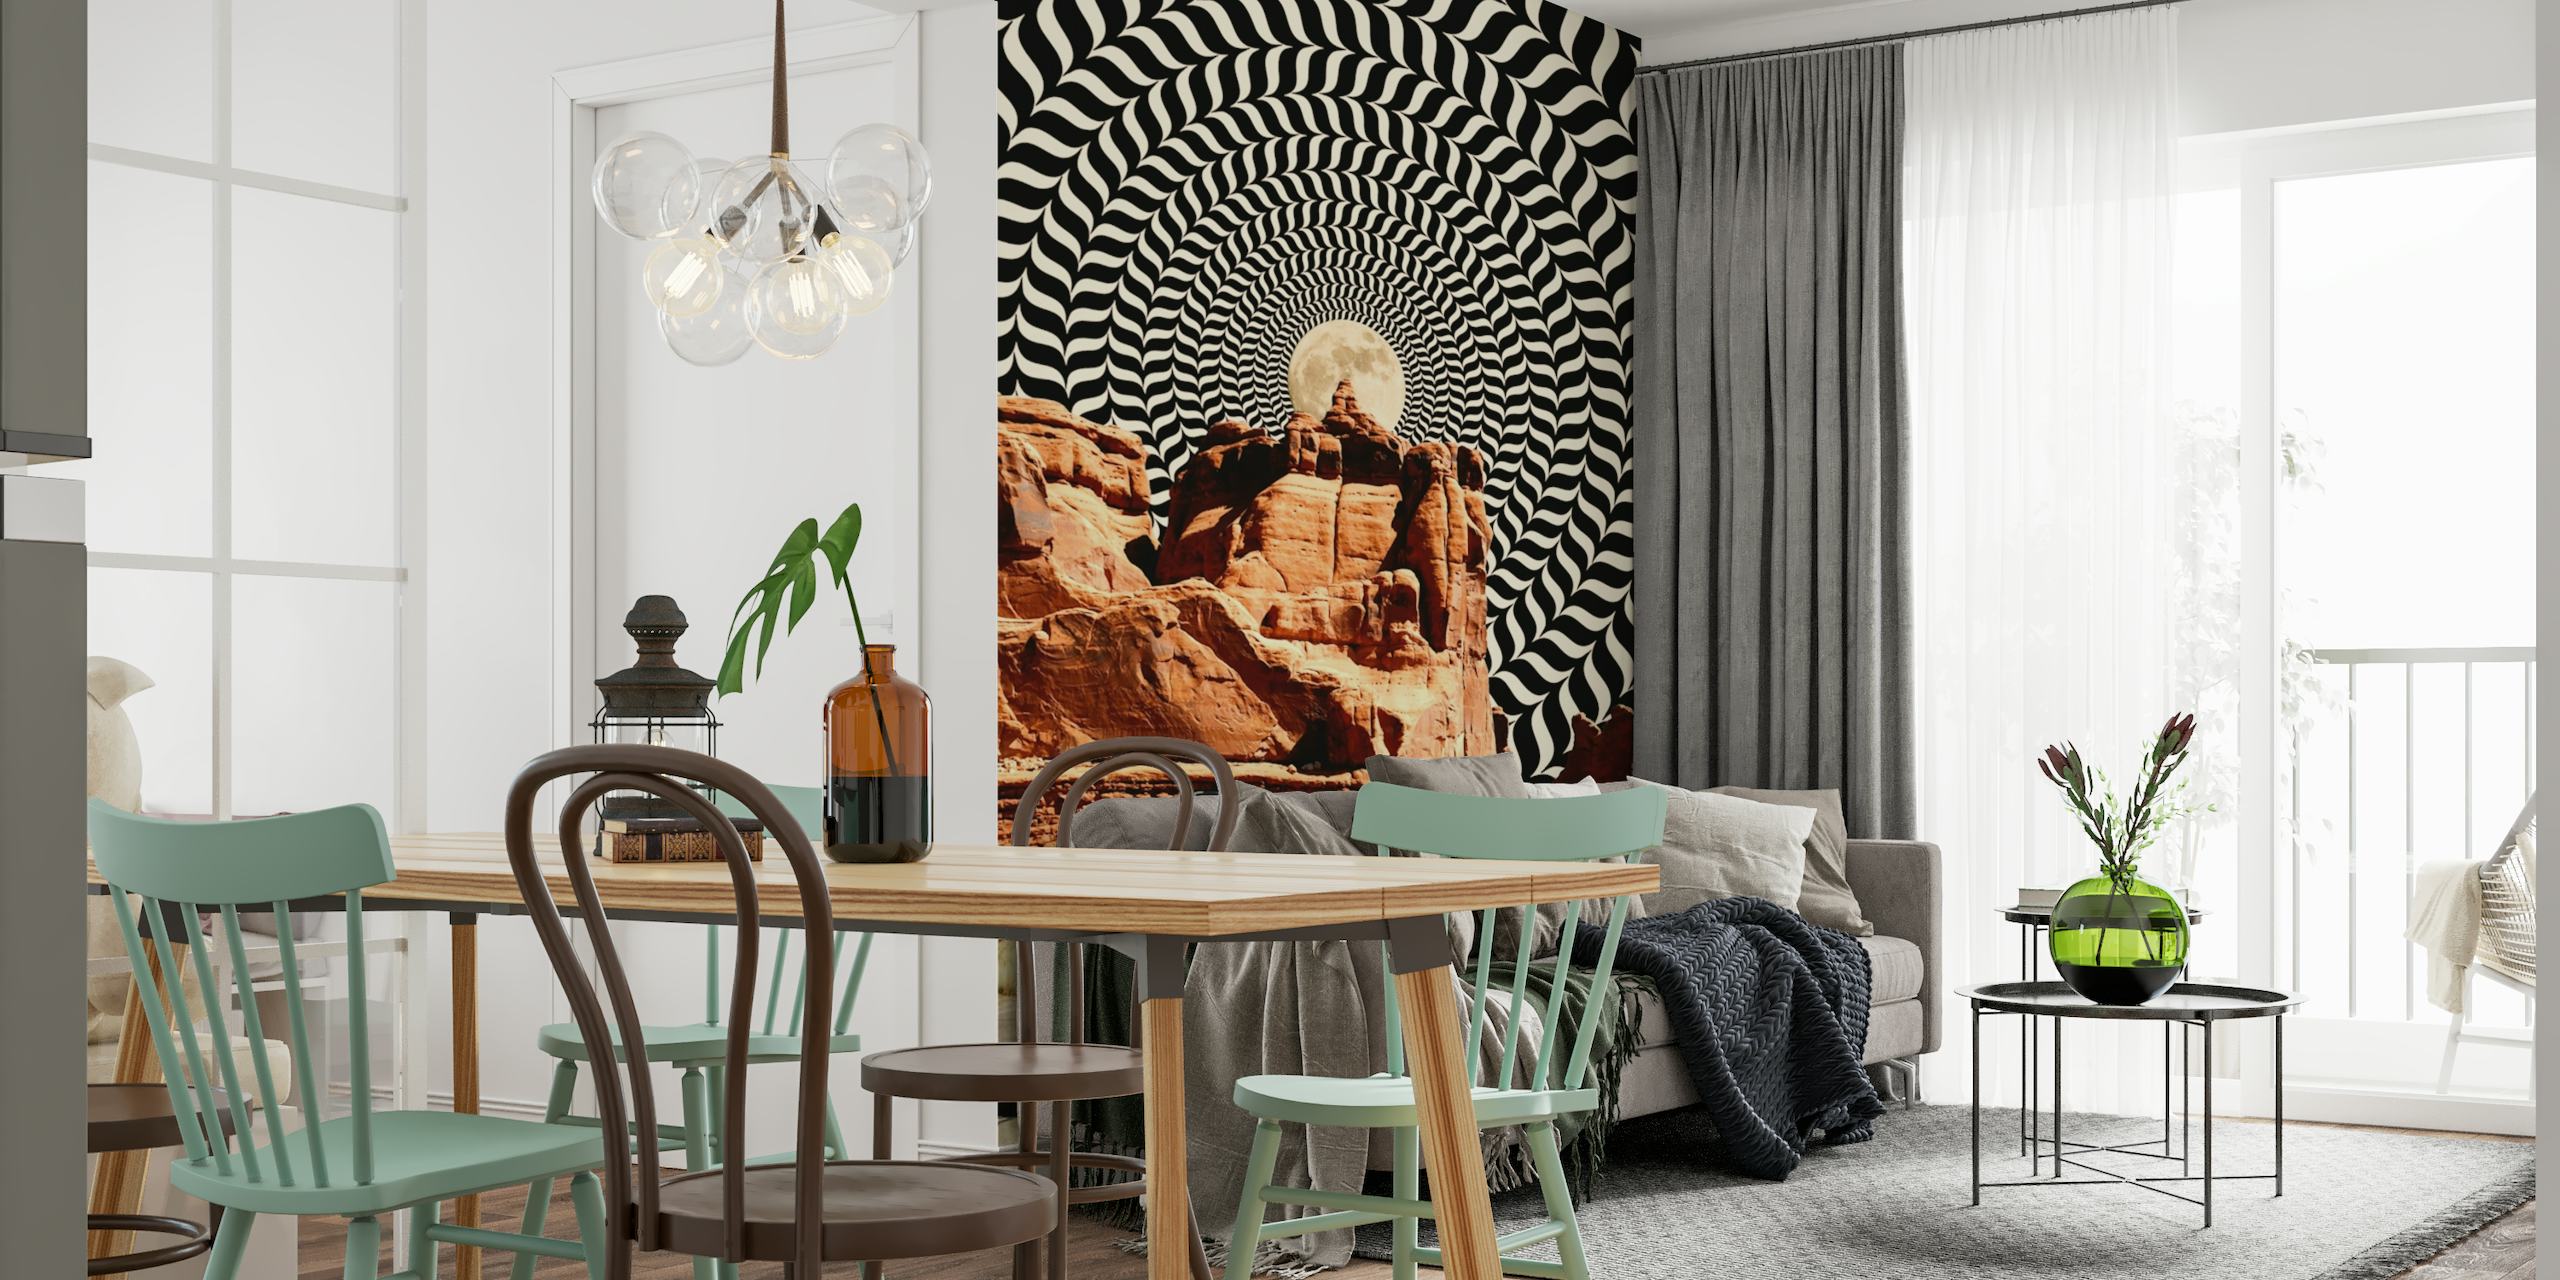 Vintage van driving through desert with optical illusion sky wall mural